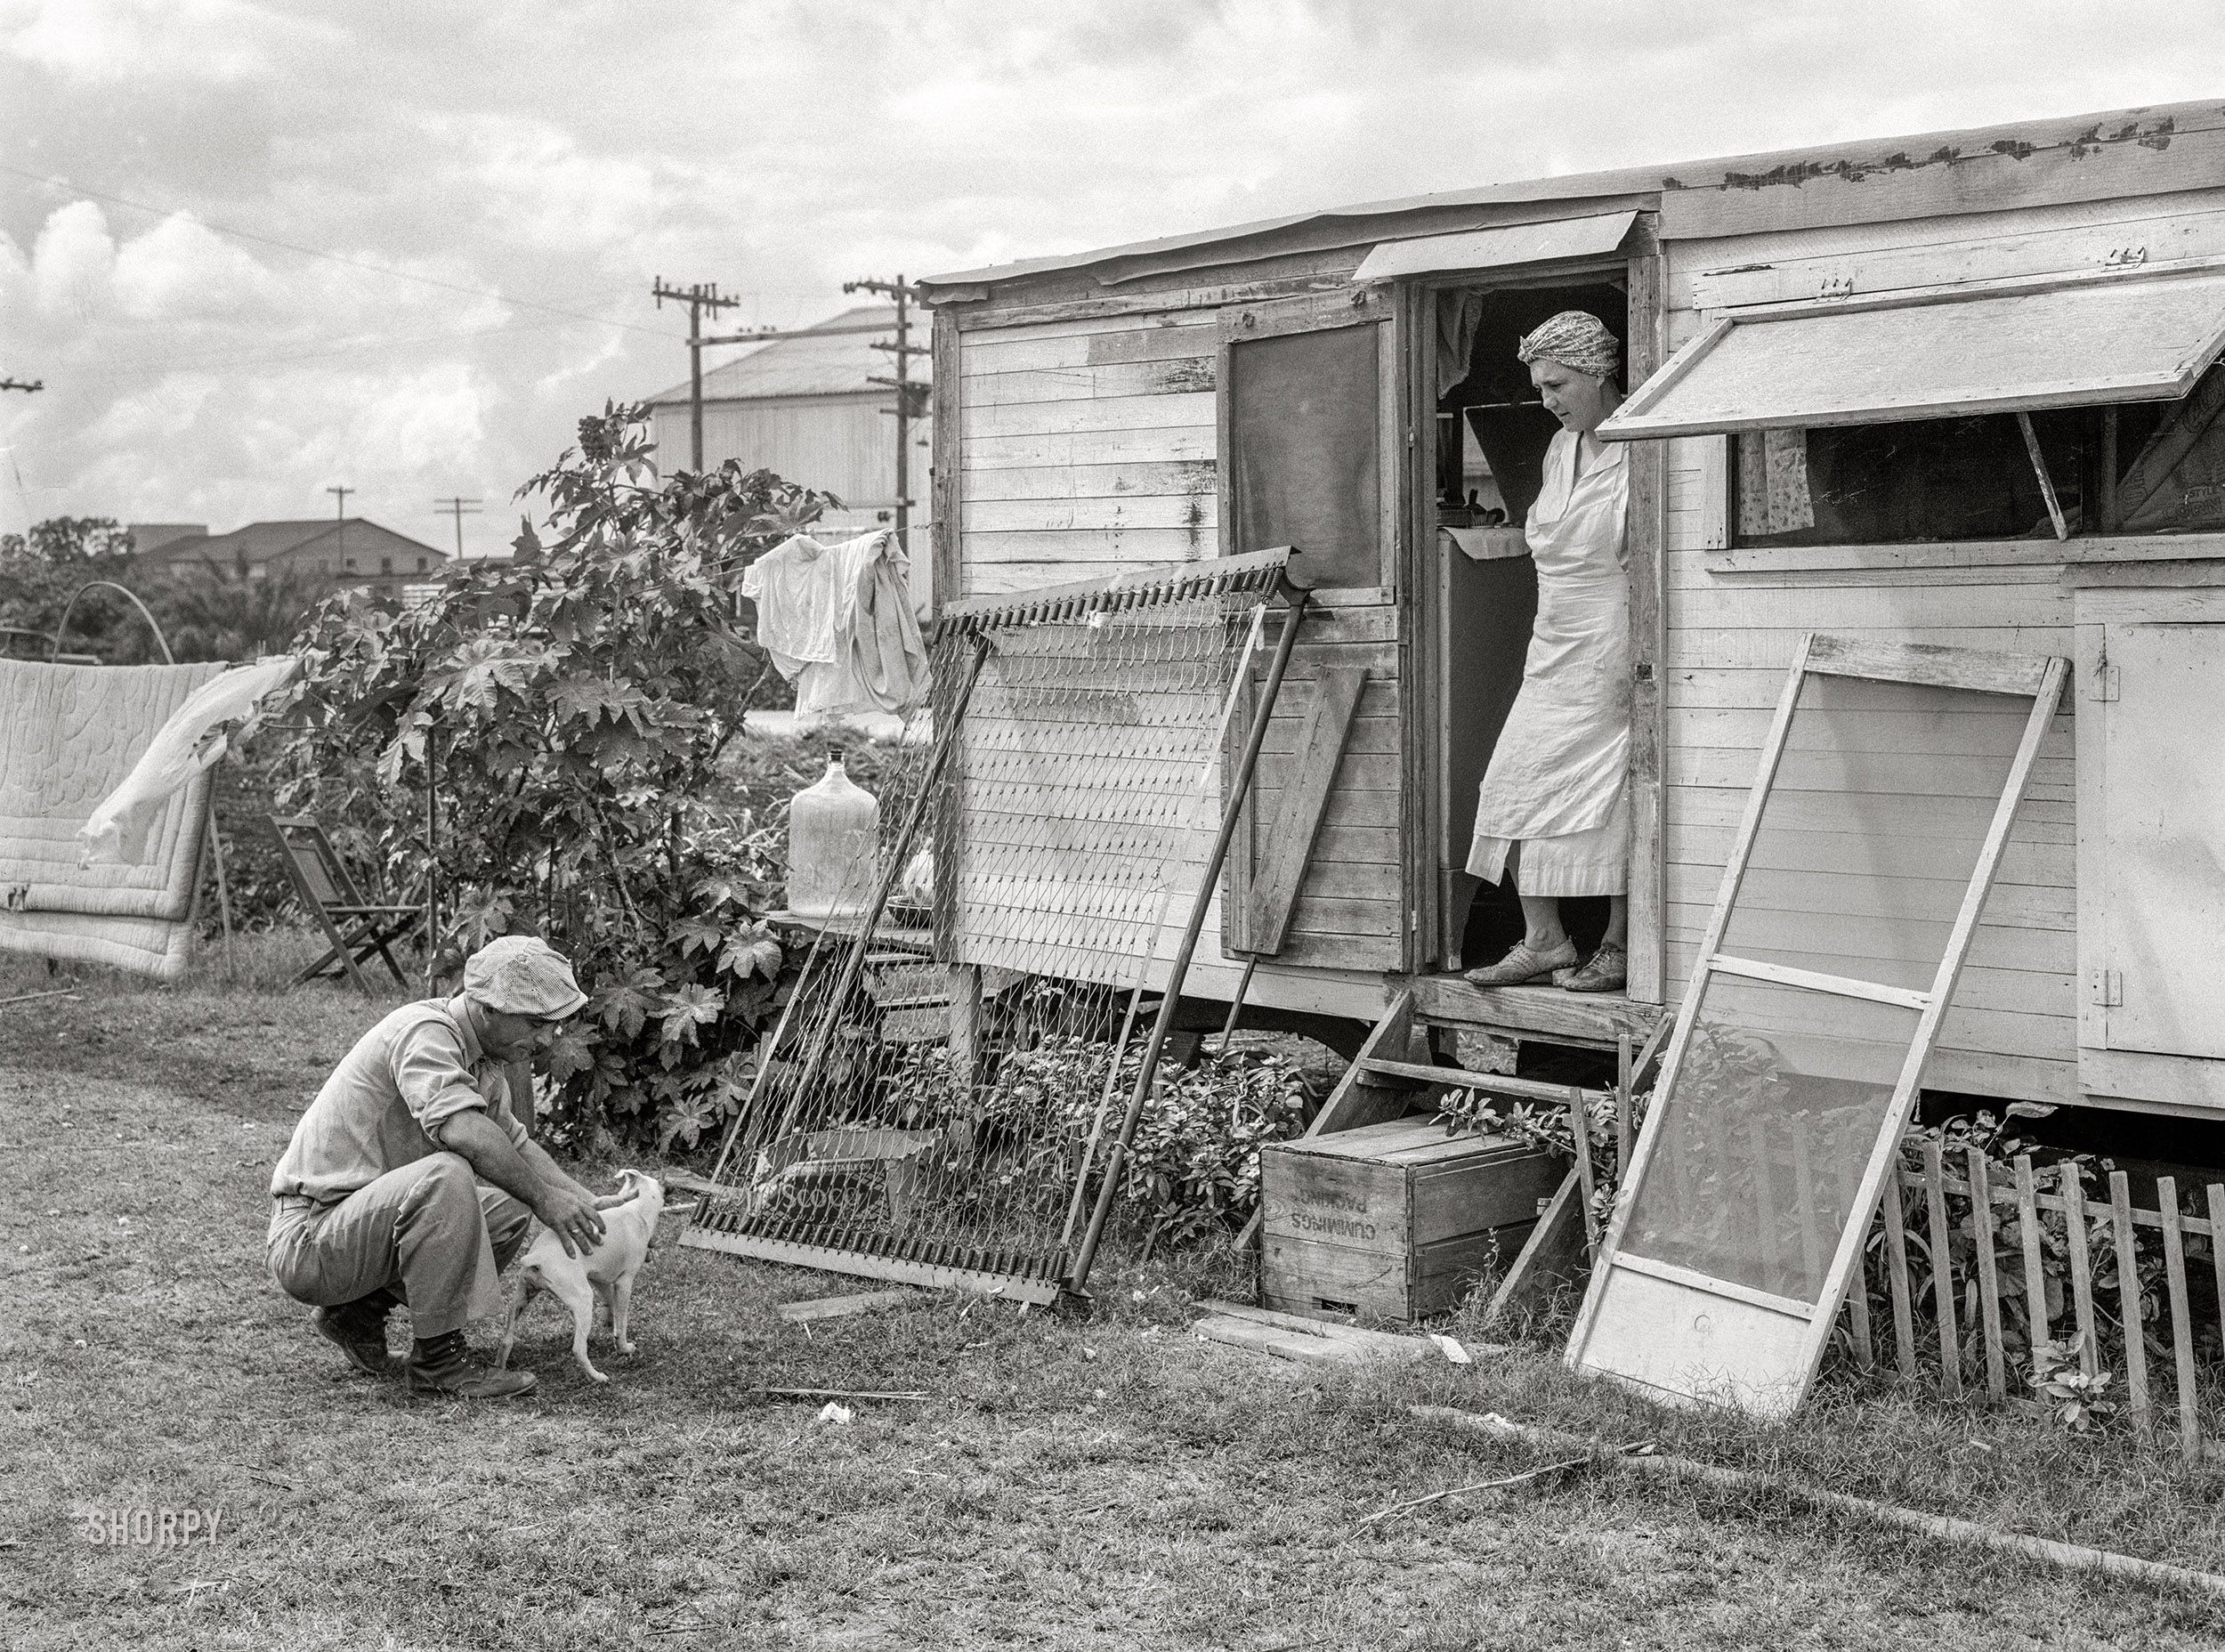 January 1939. "Migrant packinghouse workers. Belle Glade, Florida." Medium format acetate negative by Marion Post Wolcott for the Farm Security Administration. View full size.